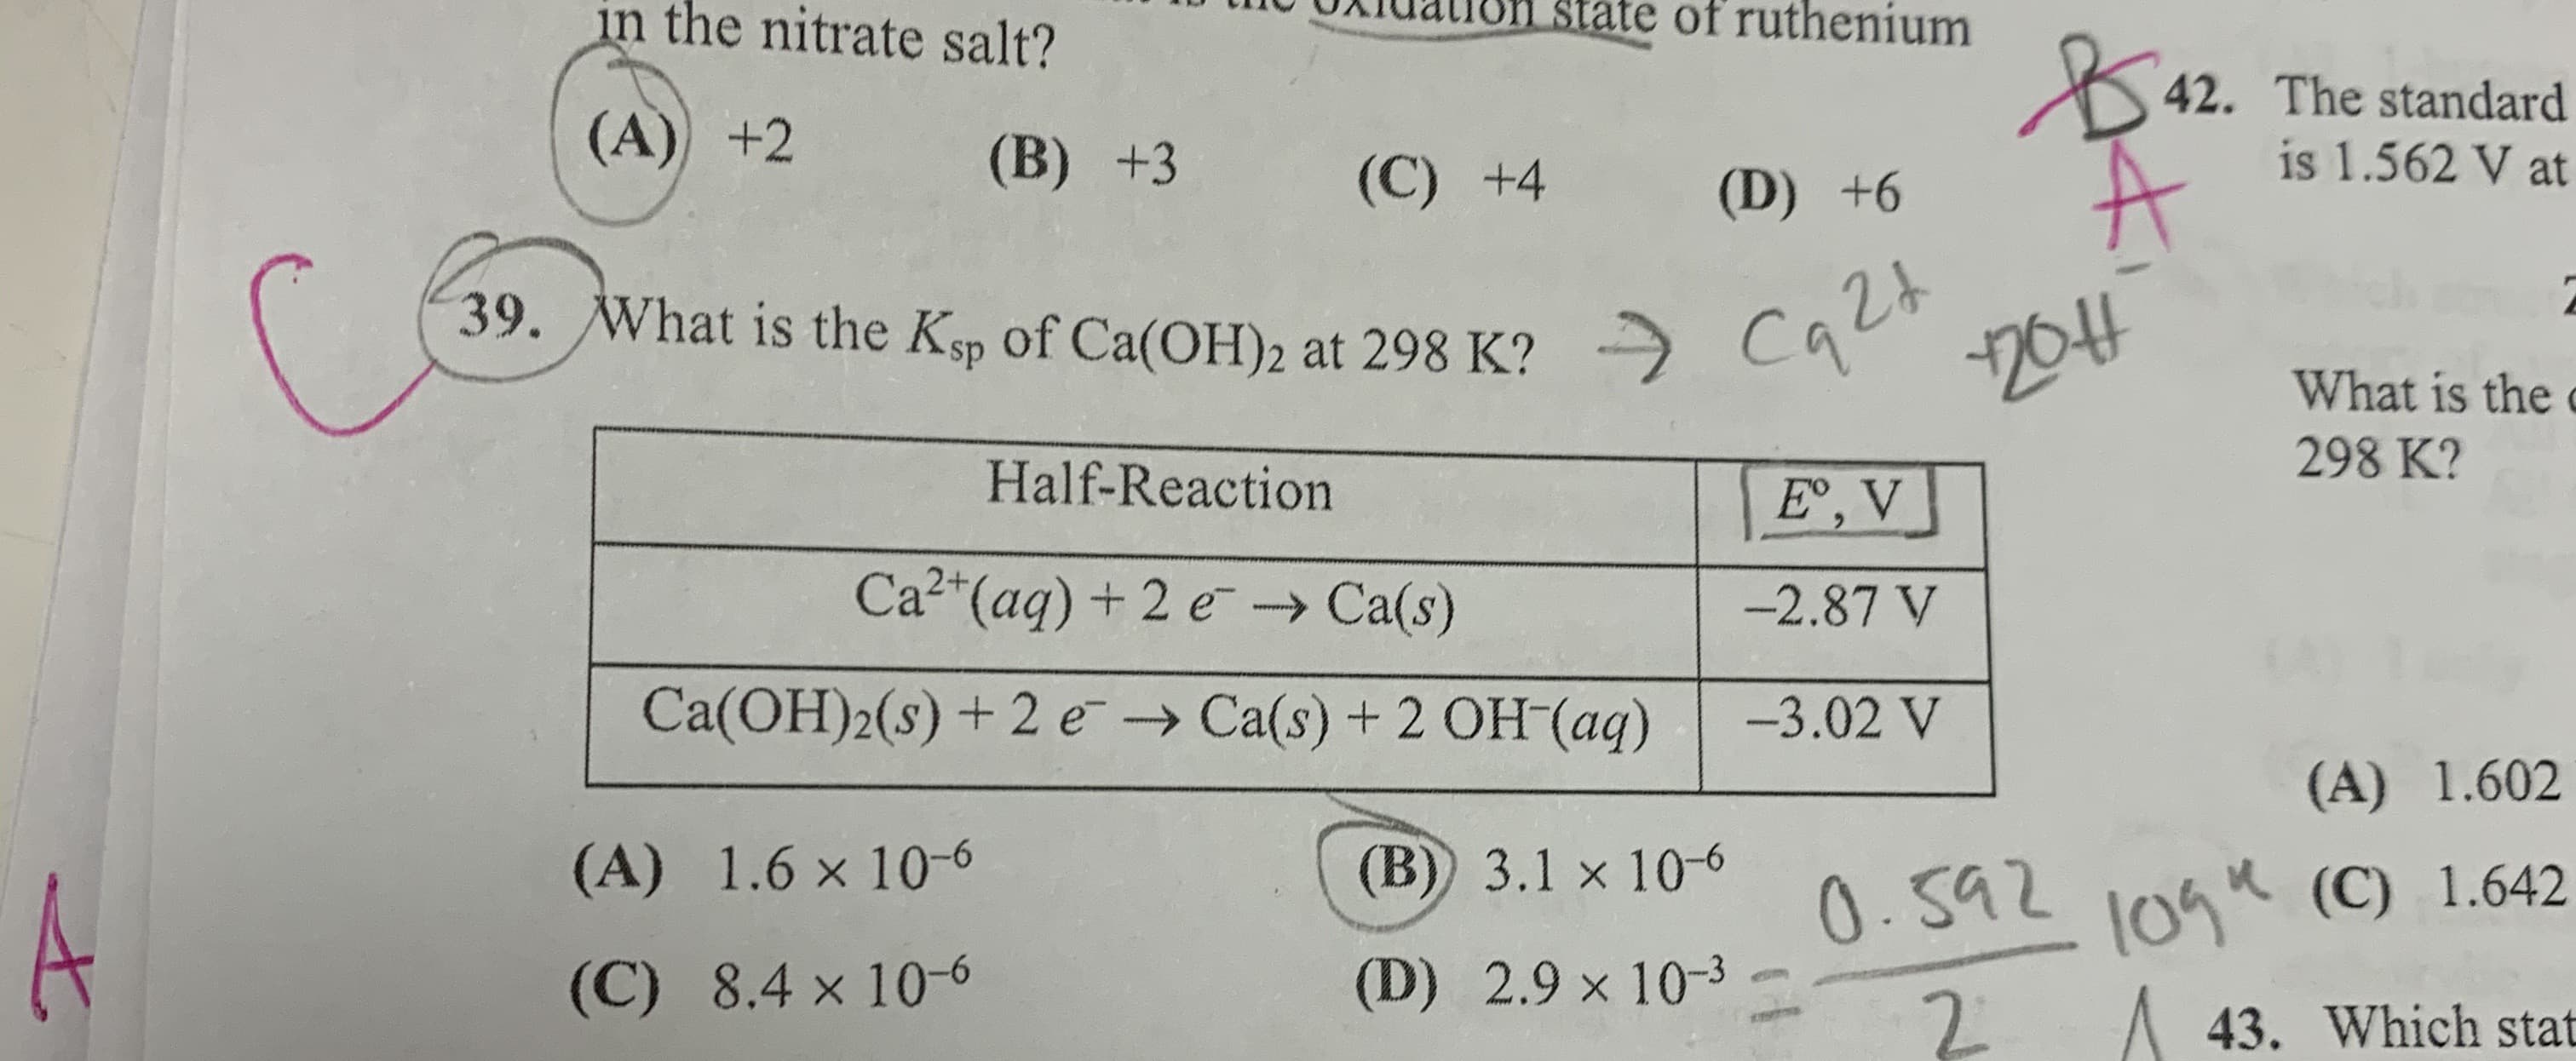 in the nitrate salt?
state of ruthenium
42. The standard
is 1.562 V at
(A) +2
(B) +3
(C) +4
(D) +6
39. What is the Kp of Ca(OH)2 at 298 K?
cae
204
What is the
298 K?
Half-Reaction
E',V
Ca2"(aq) + 2 e→ Ca(s)
-2.87 V
Ca(OH)2(s) + 2 e → Ca(s) + 2 OH (aq)
-3.02 V
(A) 1.602
10gk (C) 1.642
2.
(A) 1.6 x 10-6
(B) 3.1 x 10-6
0.592
(D) 2.9 x 10-3
(C) 8.4 × 10-6
43. Which stat
